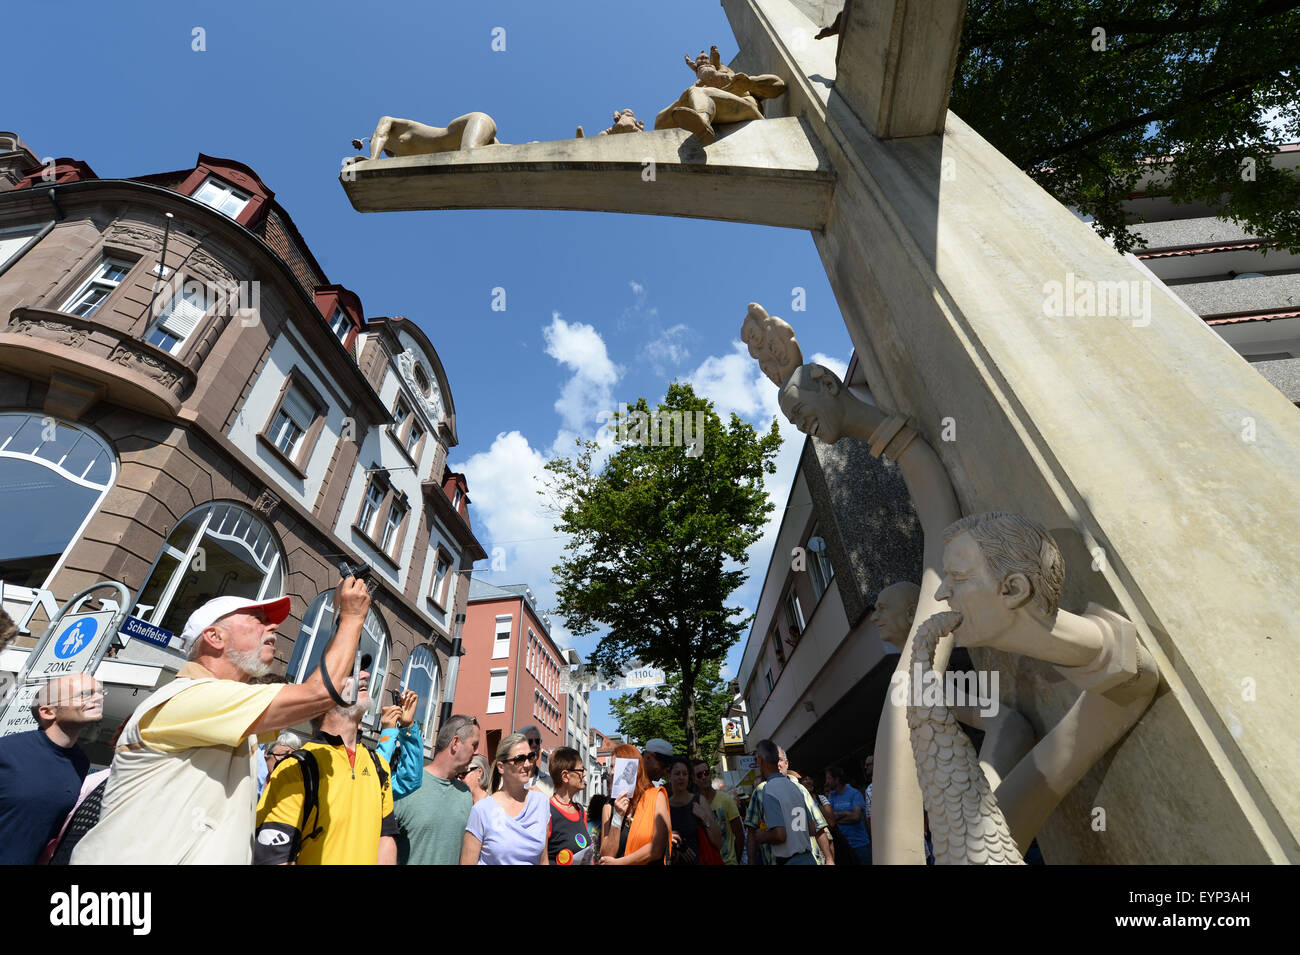 Dozens of spectators look at the newly unveiled sculpture entitled 'Paradiesschlange' (lit. paradise snake) by artist Peter Lenk in Singen am Hohentwiel, Germany, 02 August 2015. The new figures and faces will complement Lenk's existing paradise tree sculpture. The head on the bottom right depicts Dieter Schwarz, CEO of discount supermarket chain Lidl, who is 'puking money' according to Lenk. Other heads featured include US President Barack Obama, German Chancellor Angela Merkel, North Korean dictator Kim Jong-un and Russian President Vladimir Putin. Photo: FELIX KAESTLE/dpa Stock Photo